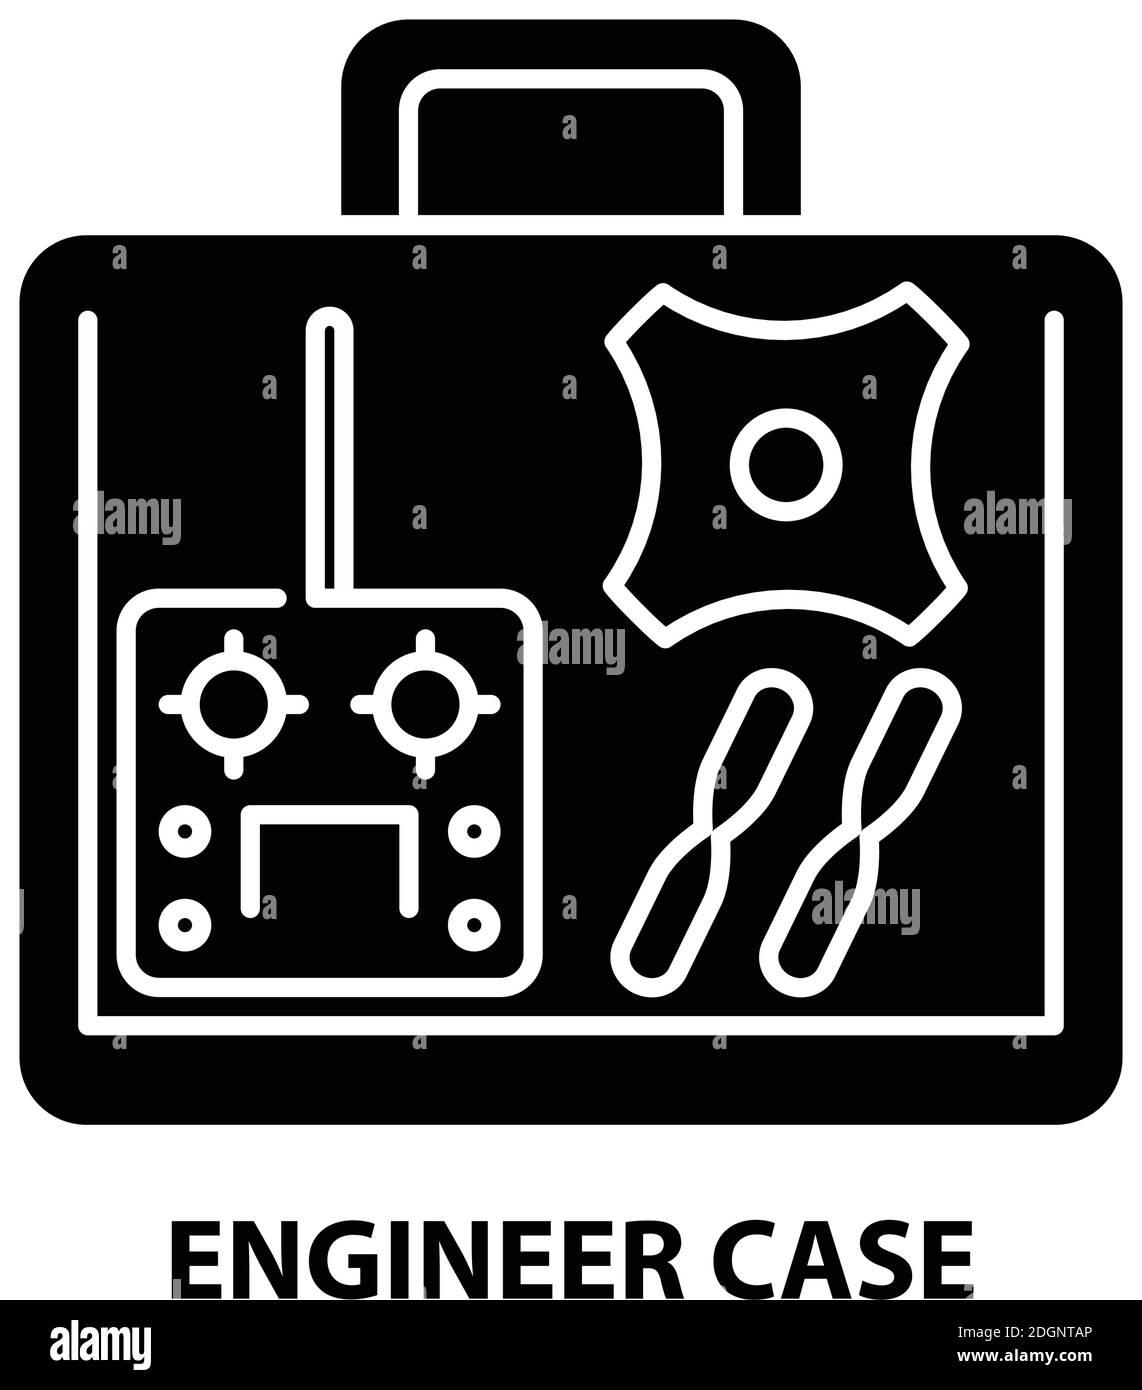 engineer case icon, black vector sign with editable strokes, concept illustration Stock Vector